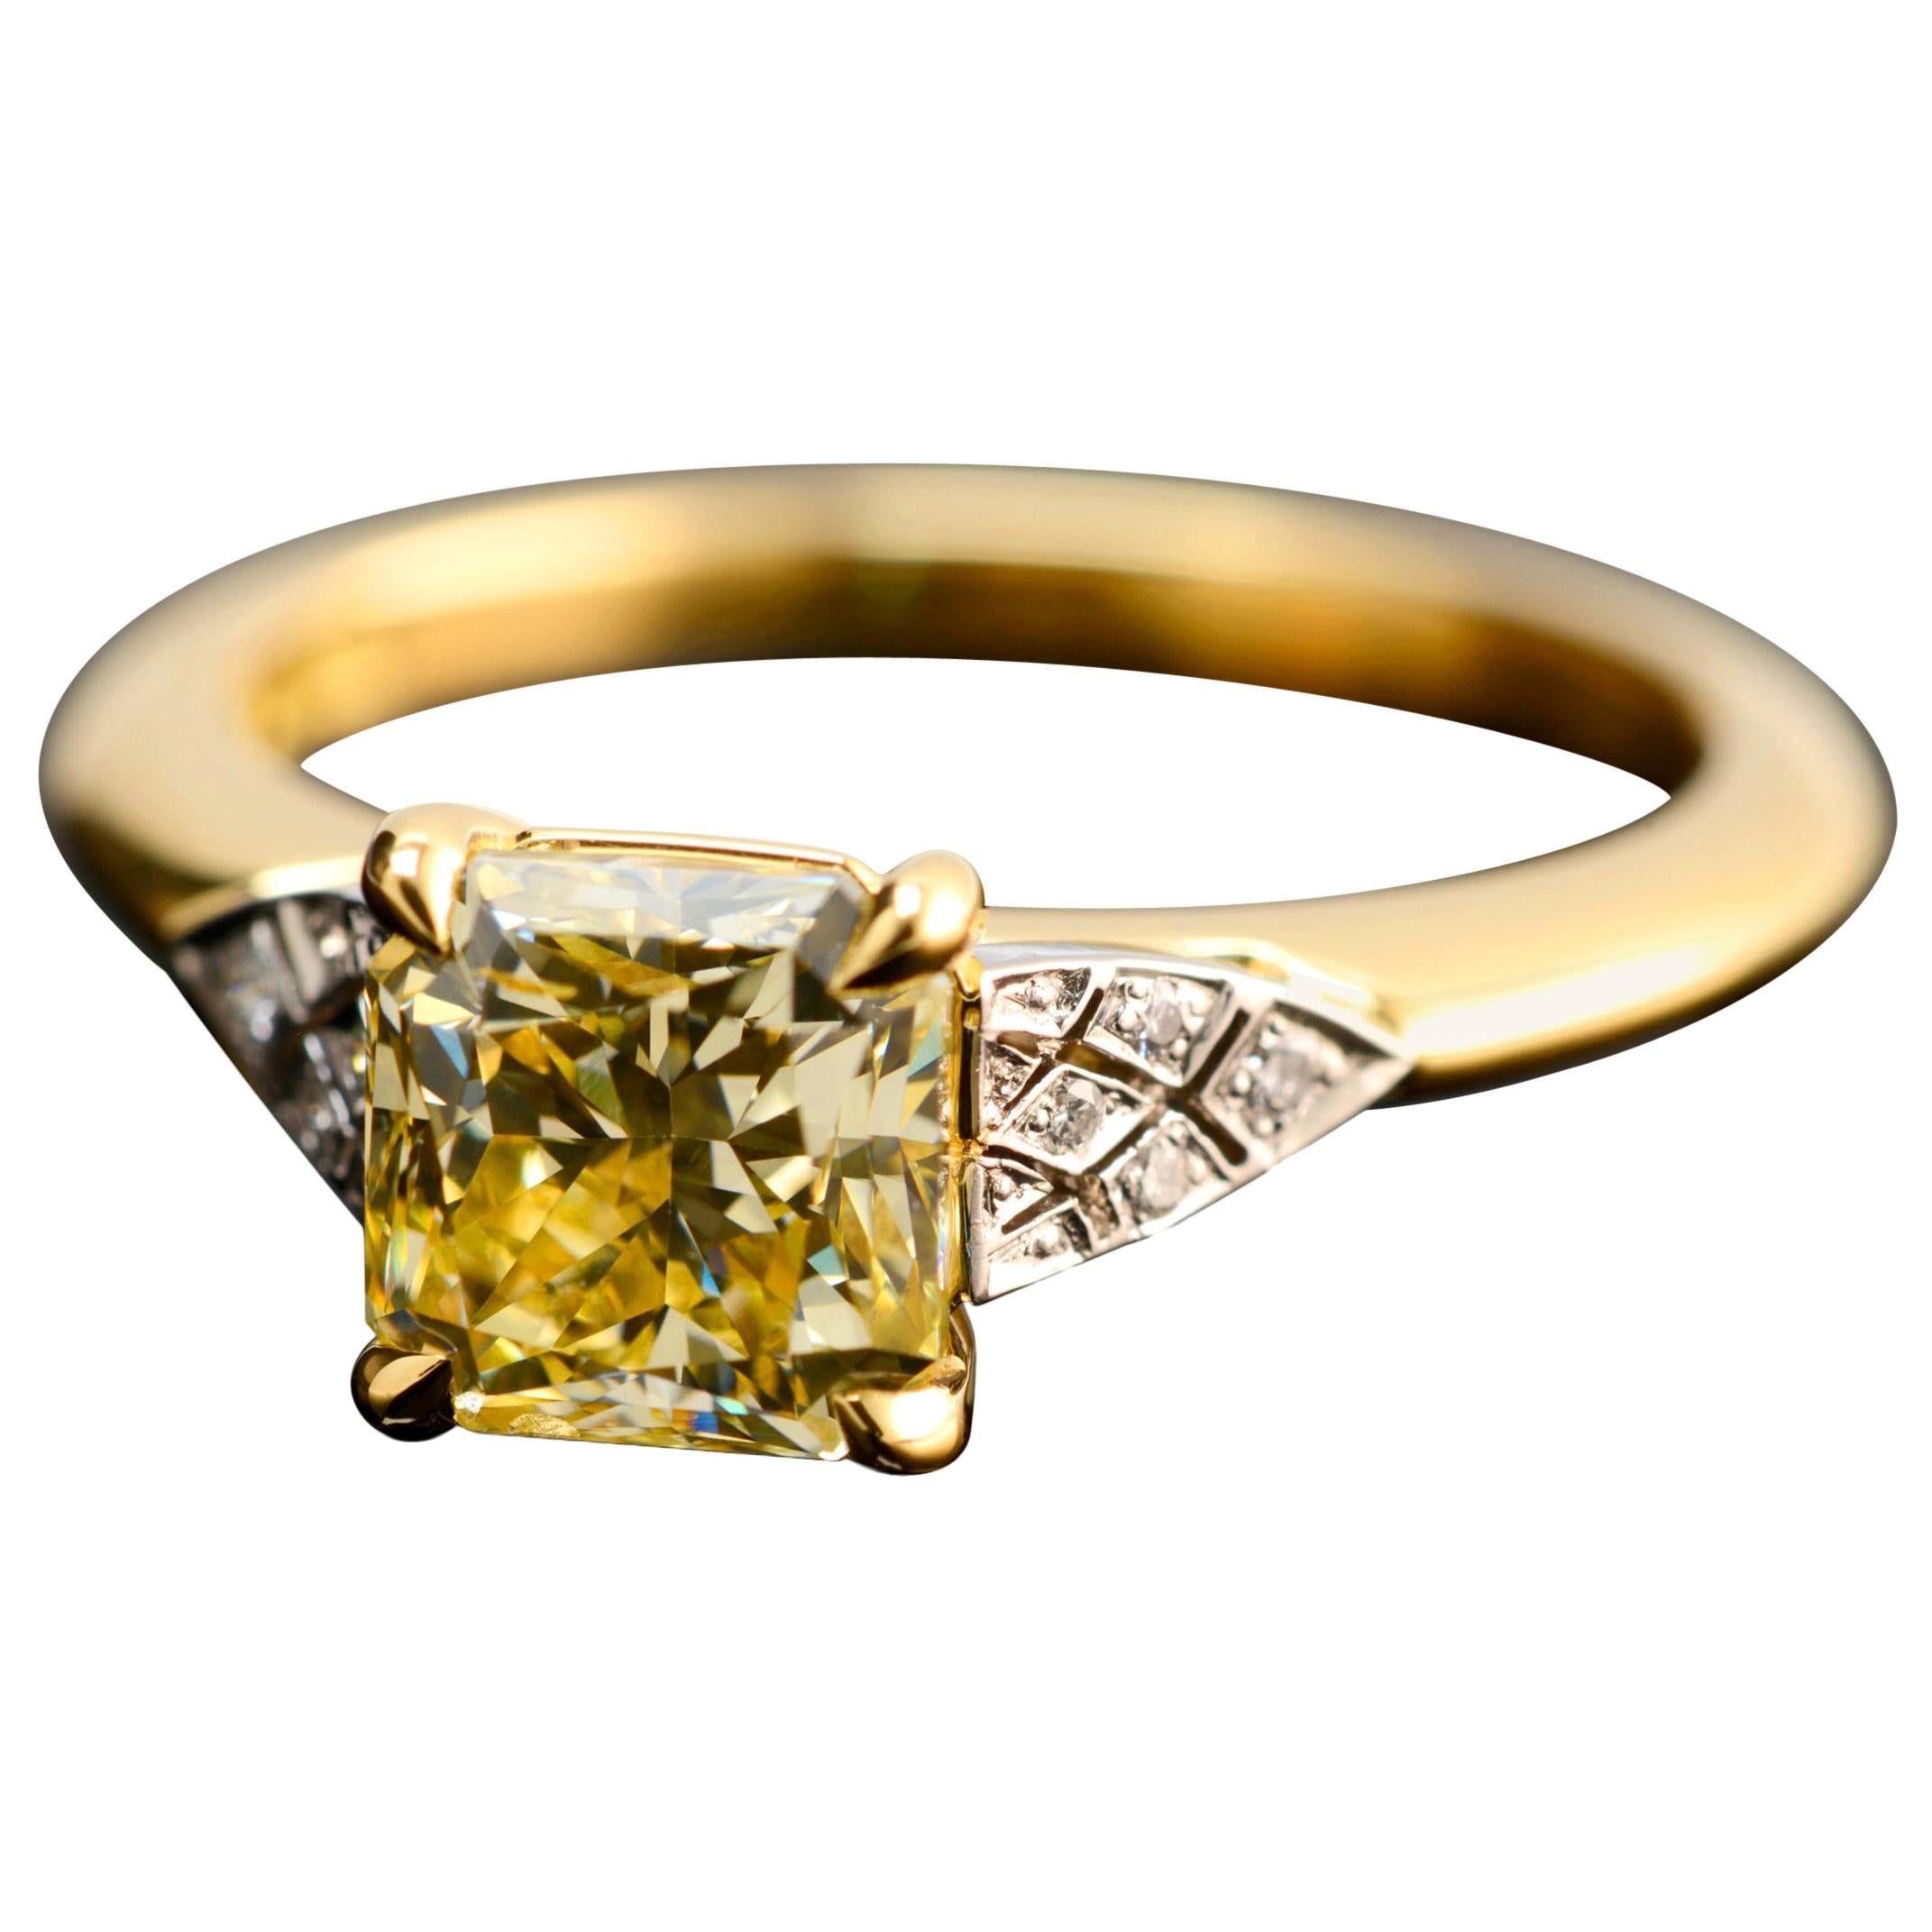 2.03 Carat Radiant Cut Fancy Yellow Diamond Engagement Ring with Art Deco Detail For Sale